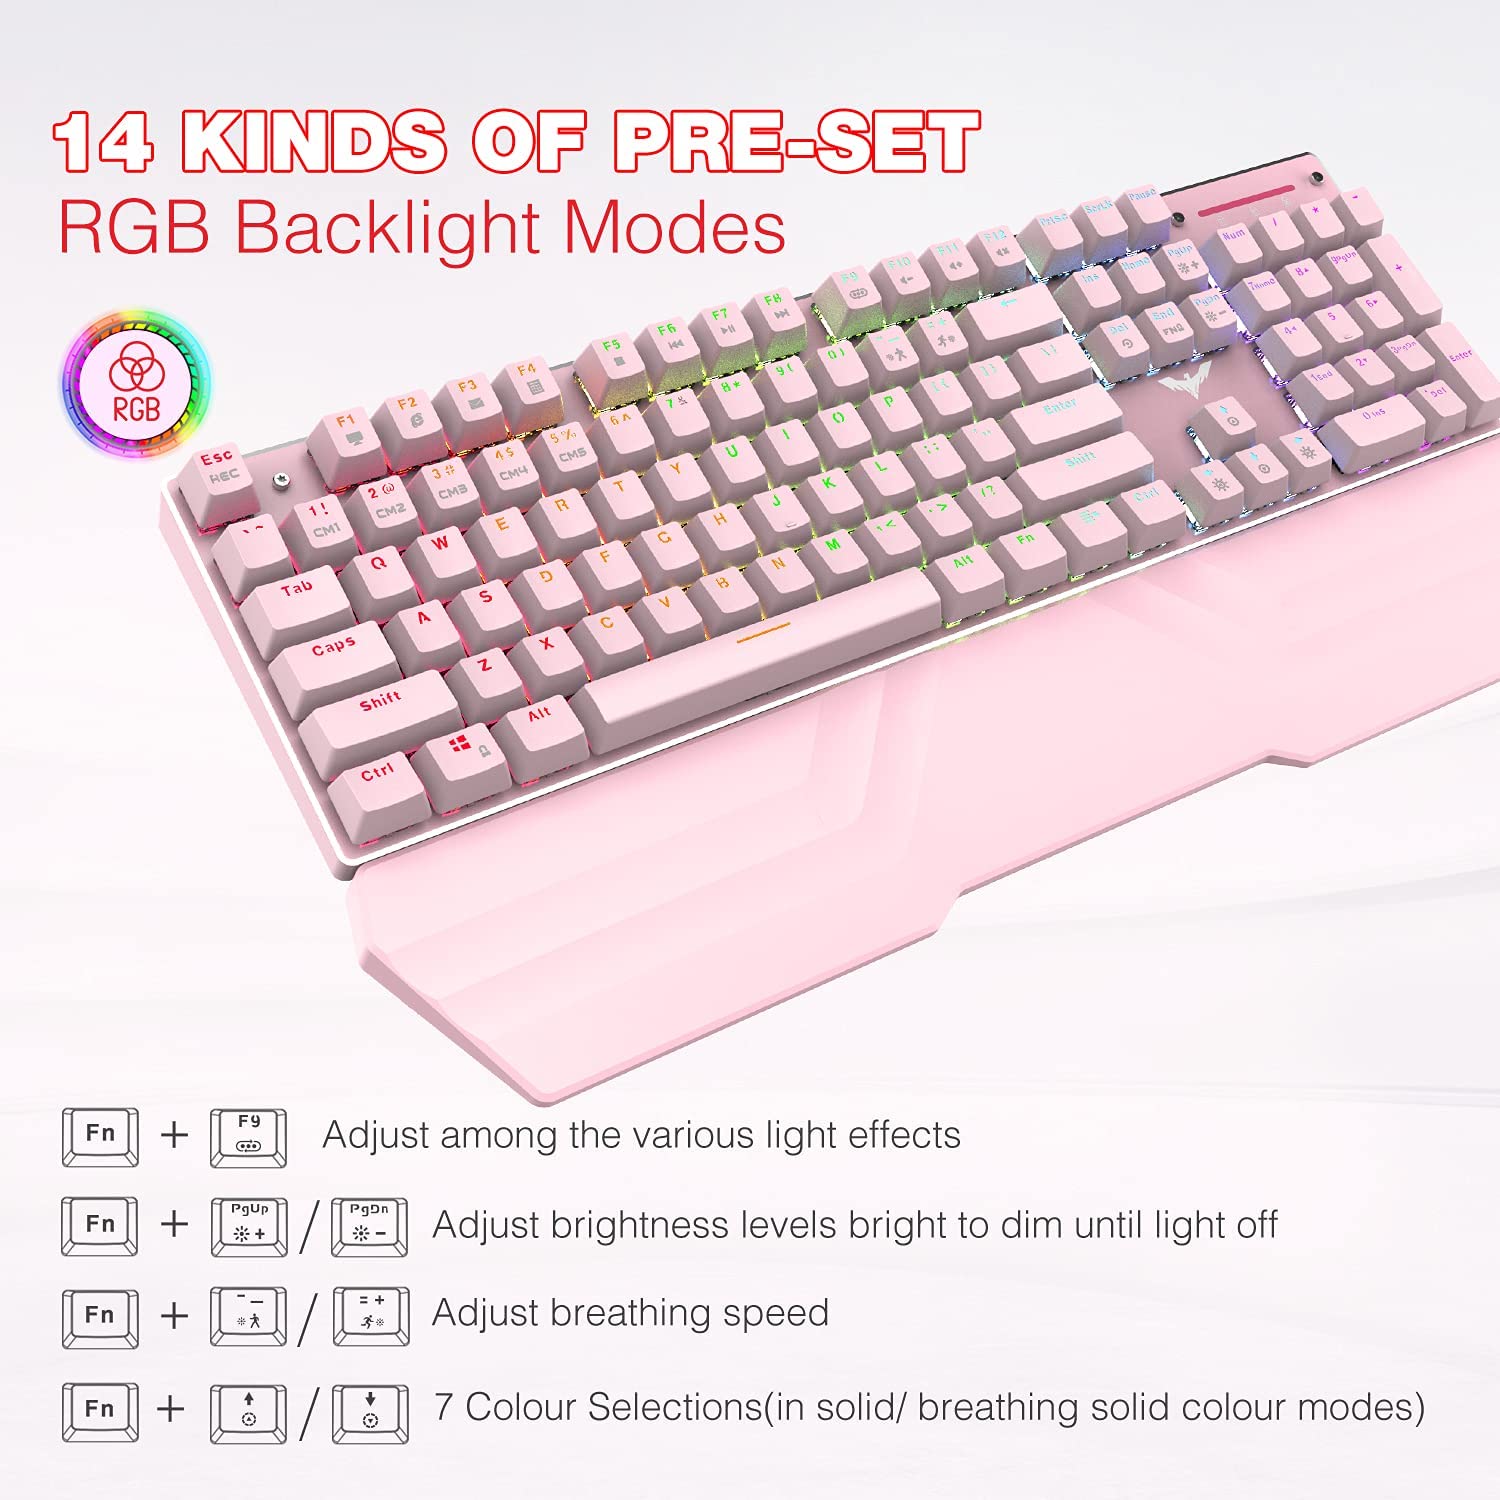 Combo Teclado y Mouse Gaming PINK – E Store